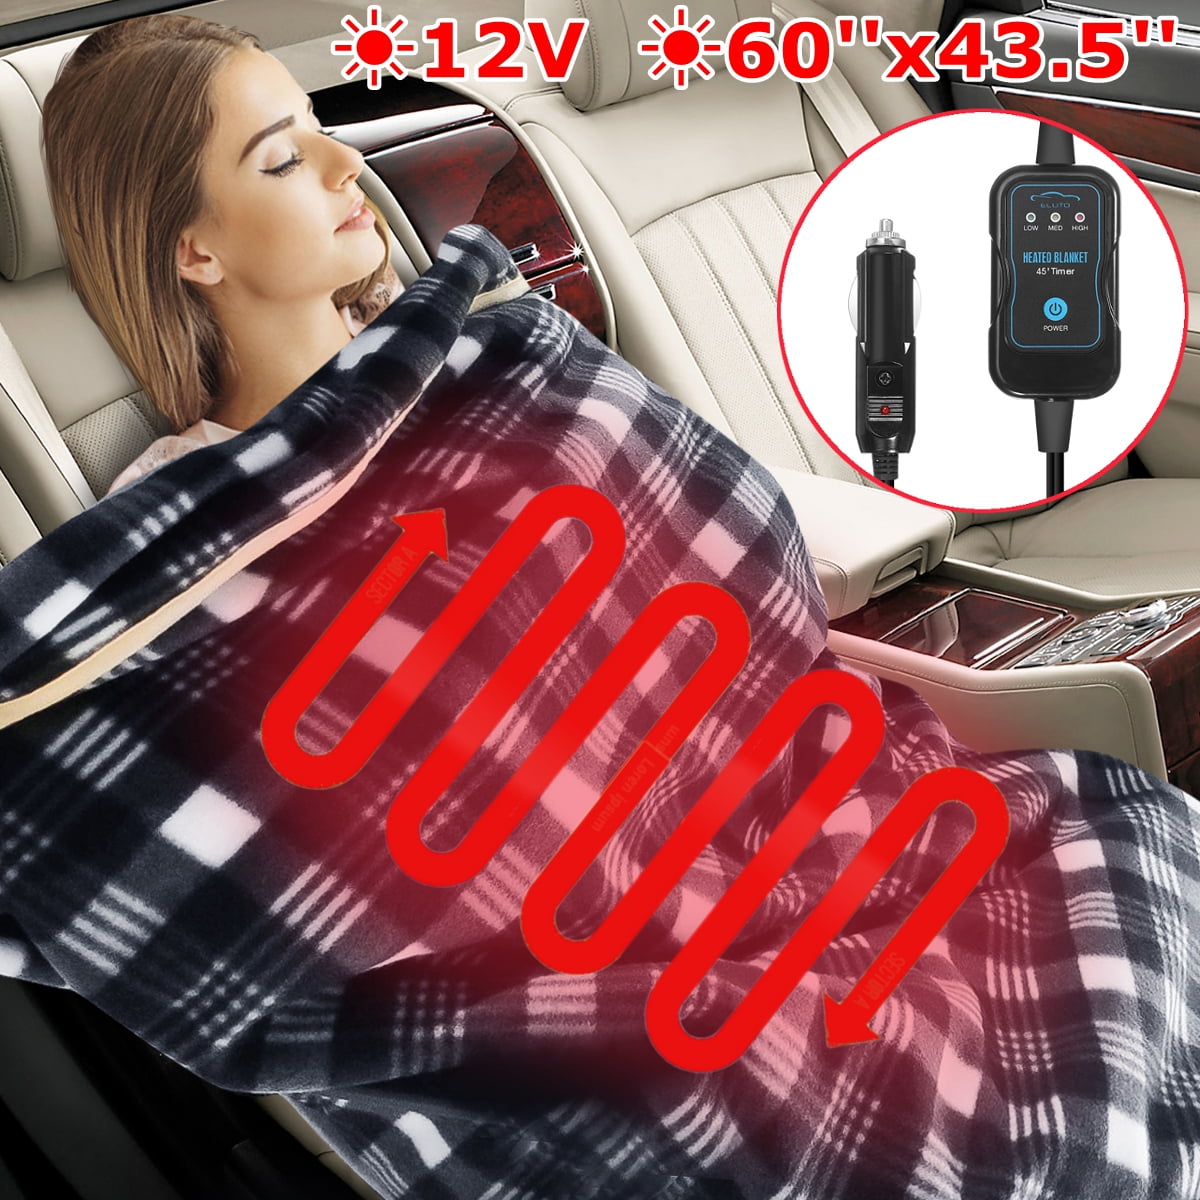 Tvird Heated Car Blanket 59x43 12V Heated Blanket for Car Heated Travel Blanket for Car RVs-Great for Cold Weather Black/White t 12V Electric Blanket with Temperature Controller 